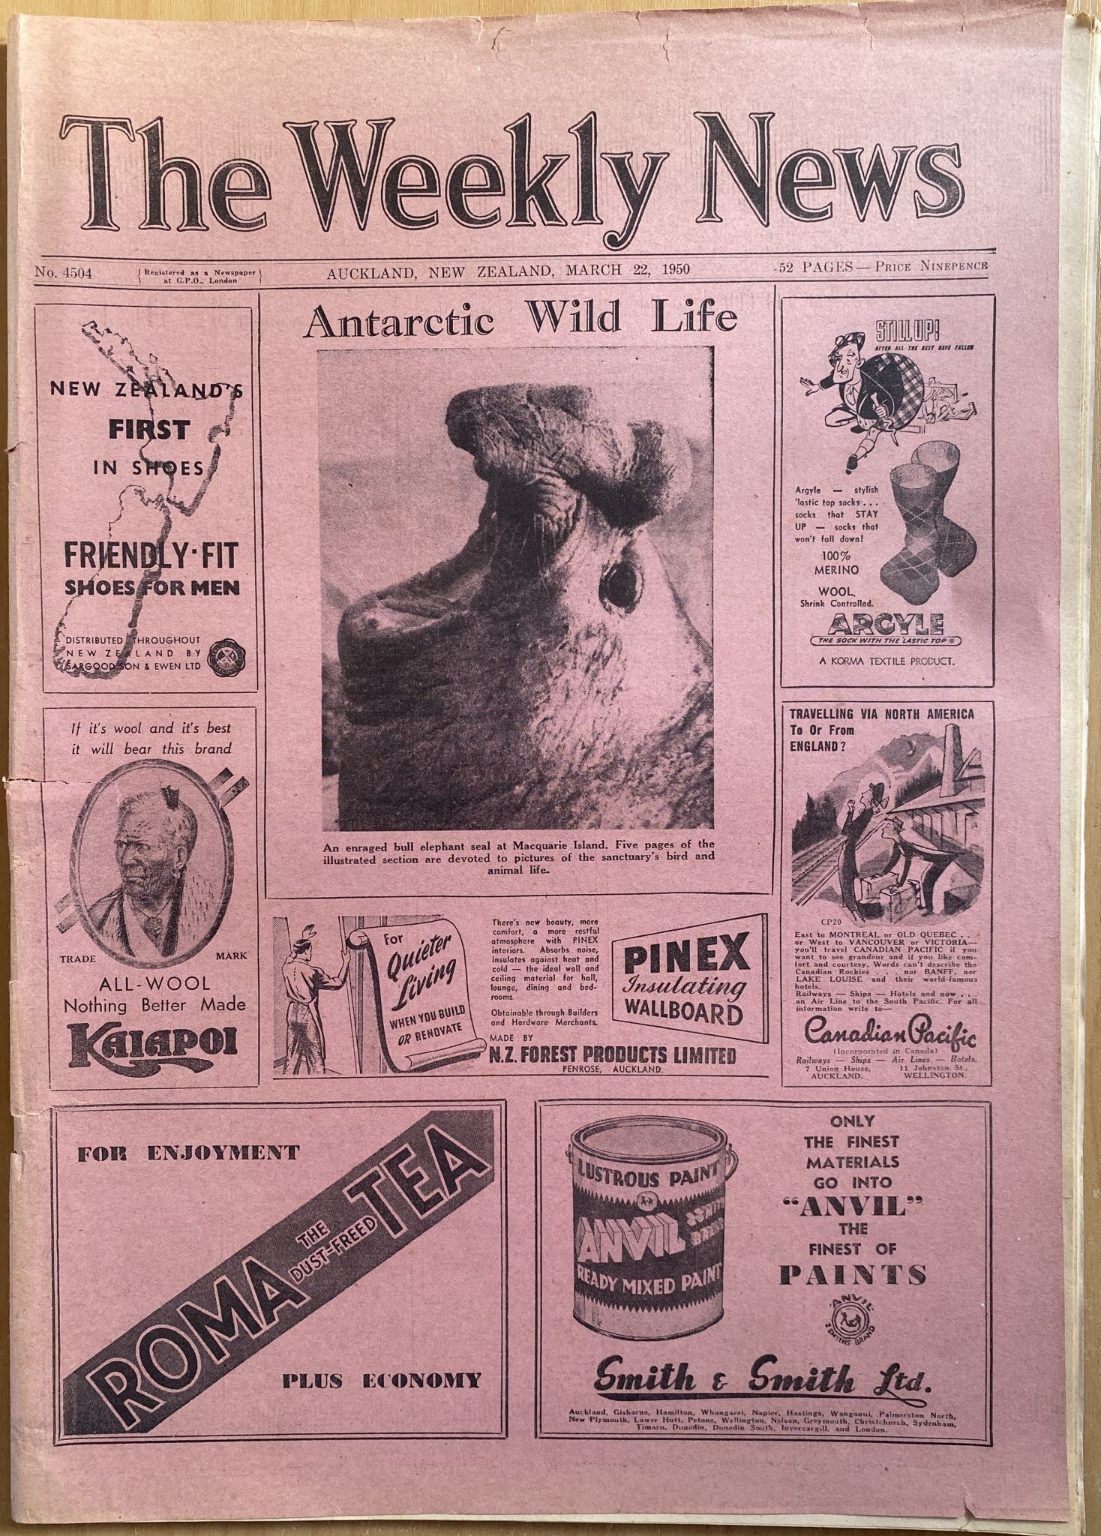 OLD NEWSPAPER: The Weekly News, No. 4504, 22 March 1950